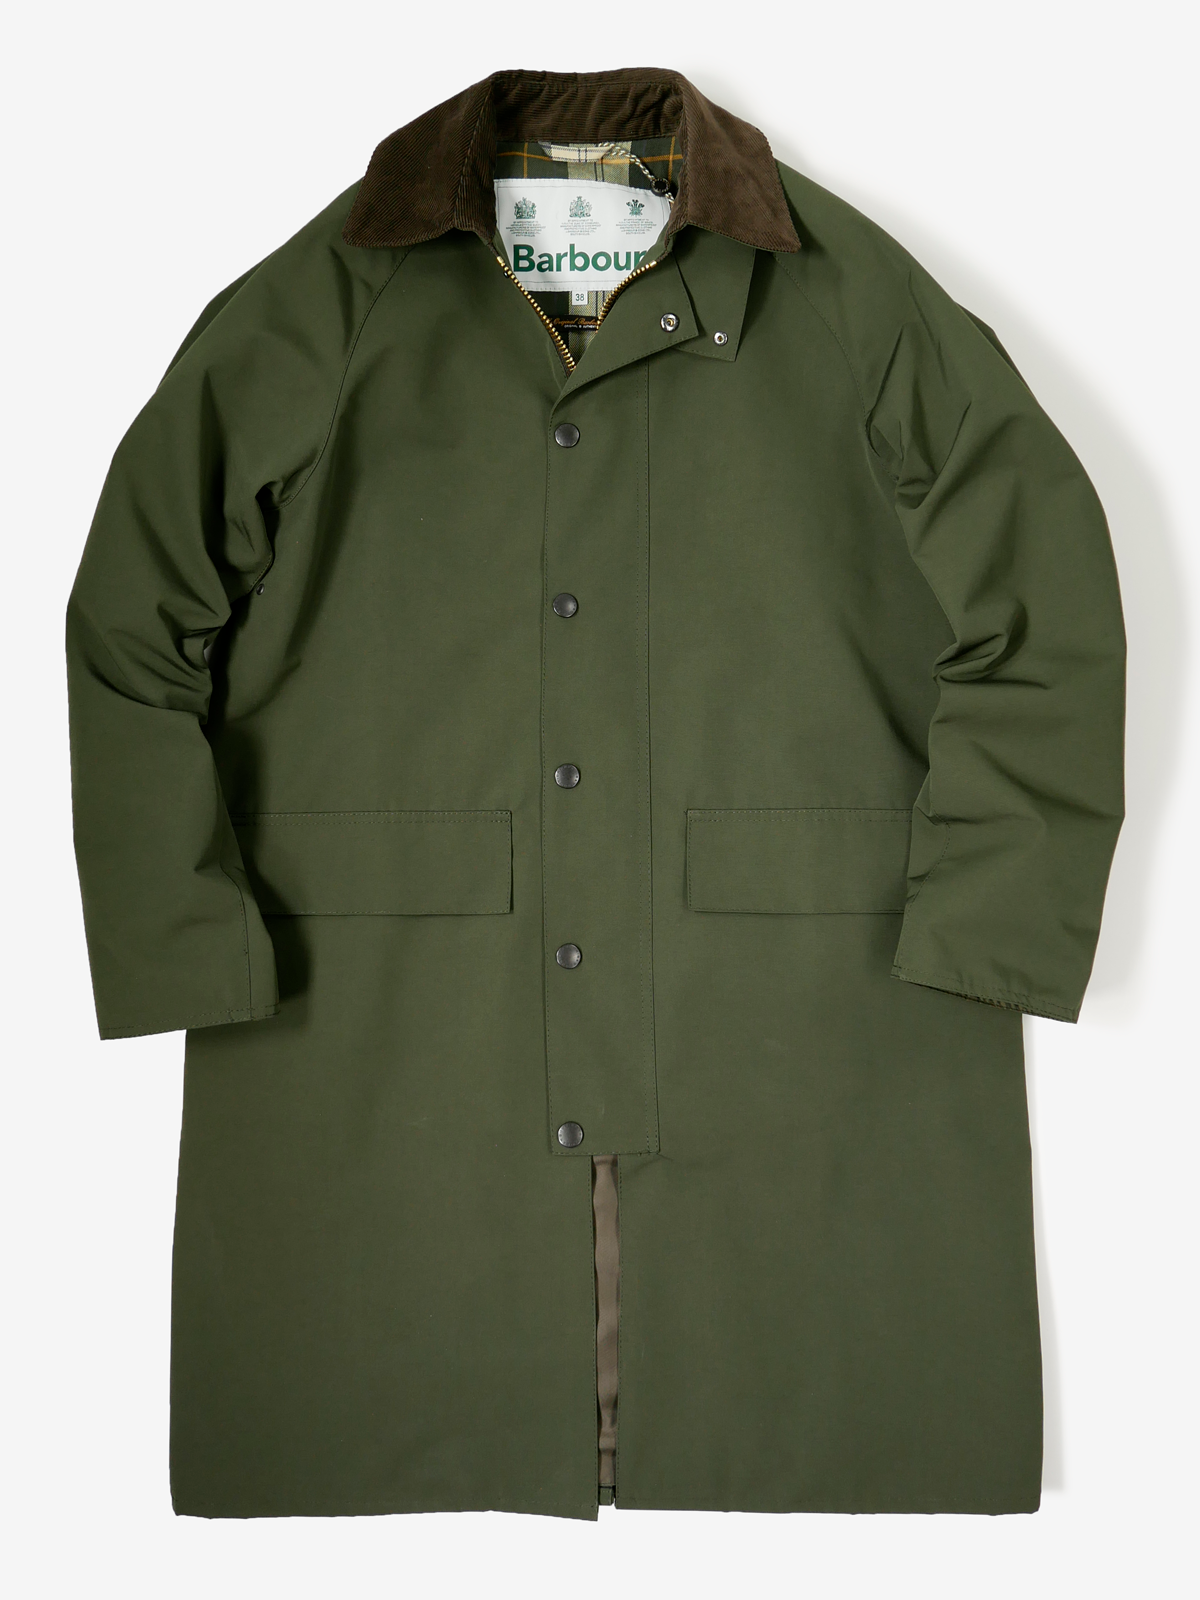 BARBOUR｜NEW BURGHLEY JACKET 2LAYER｜セージ